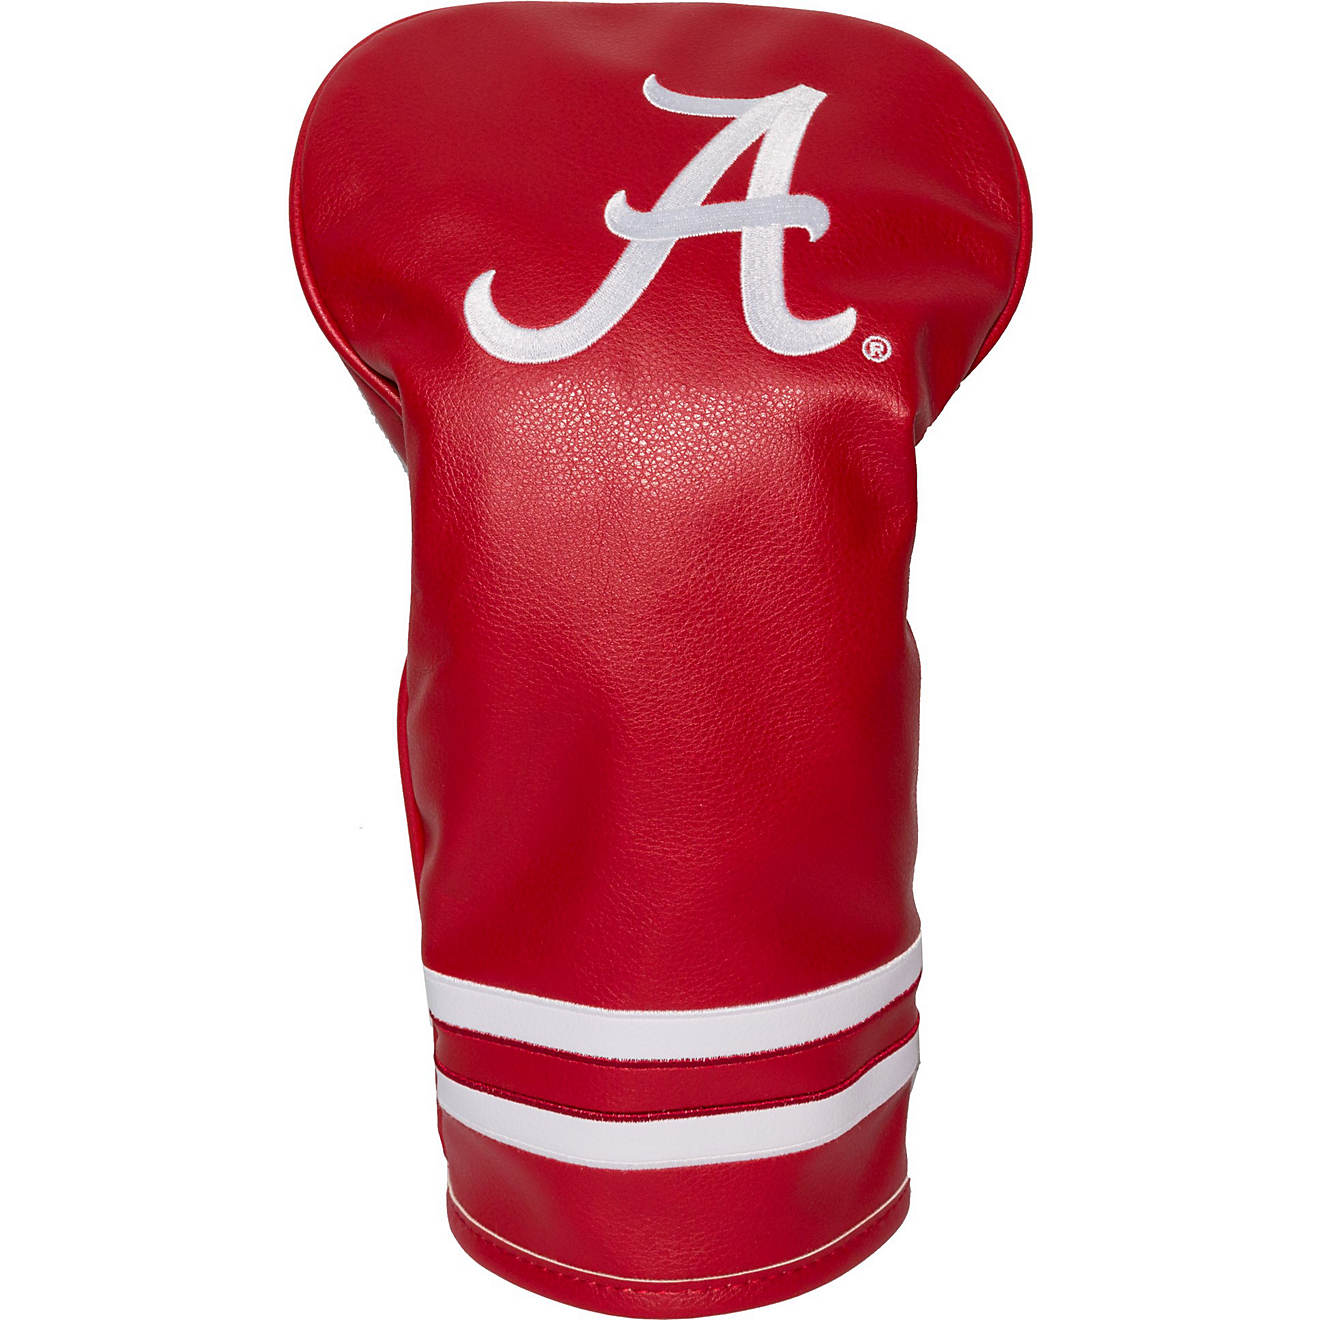 Team Golf University of Alabama Vintage Driver Headcover                                                                         - view number 1